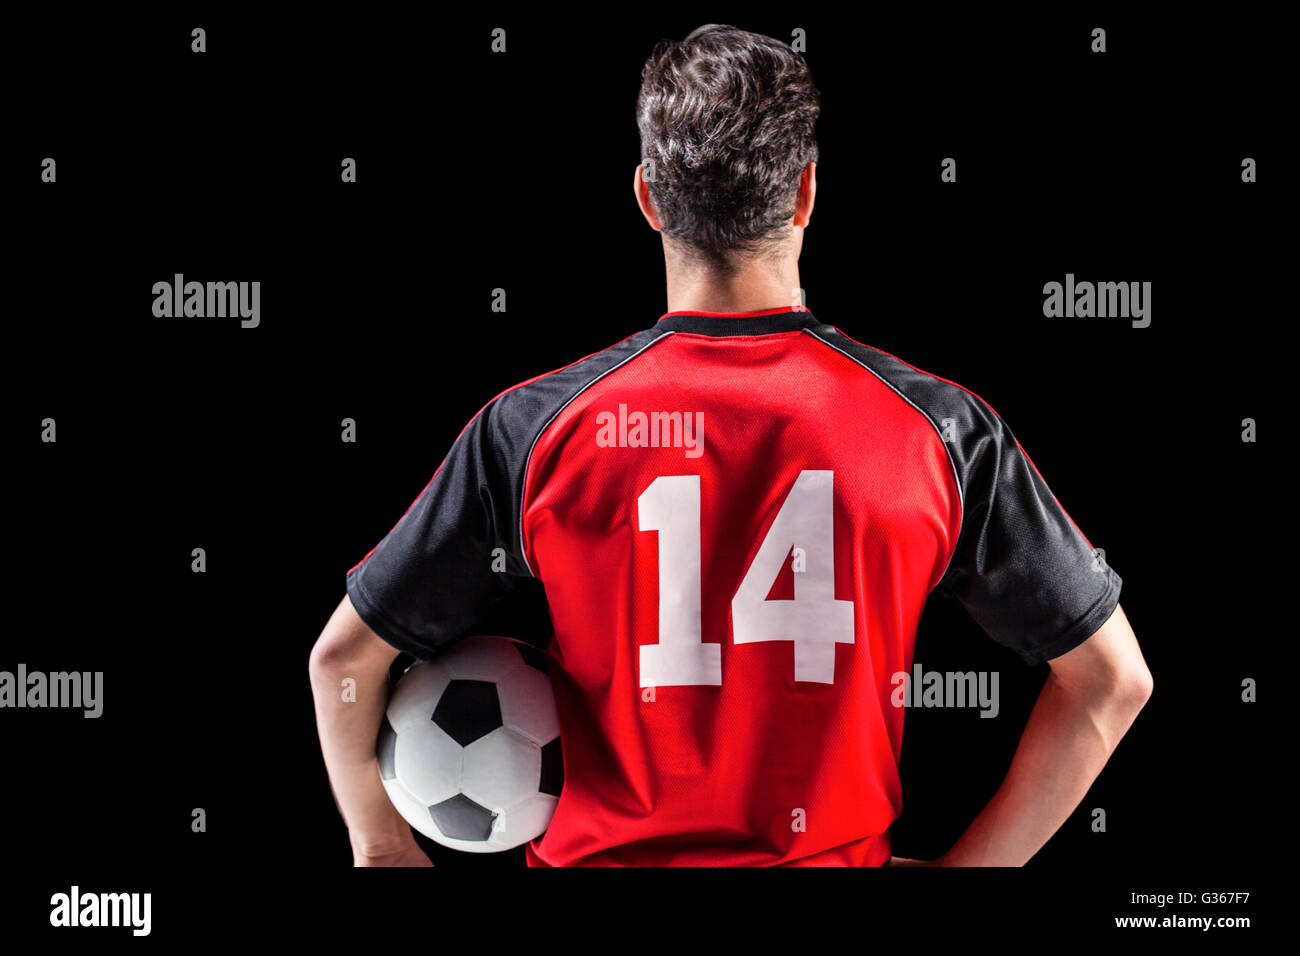 Rear view of male athlete holding football Stock Photo